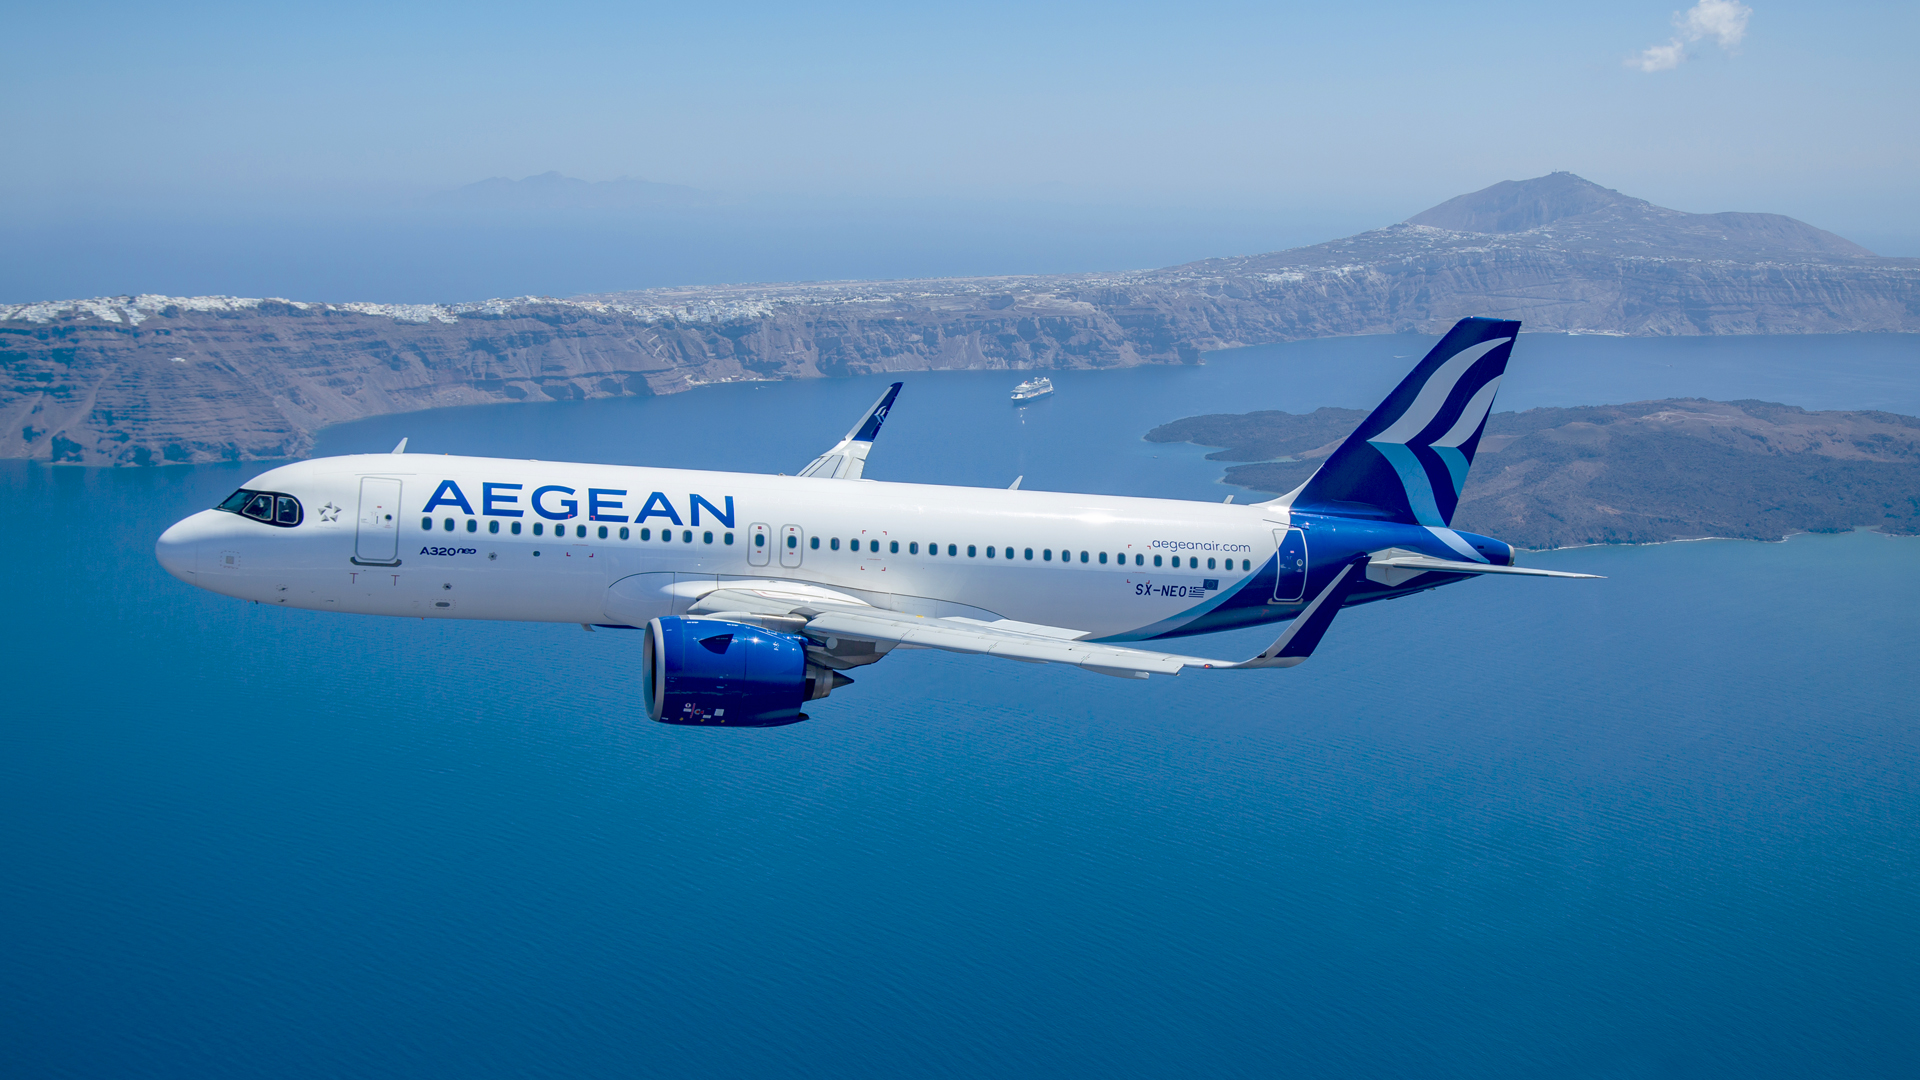 Aegean resumes service from Cologne Bonn to Athens